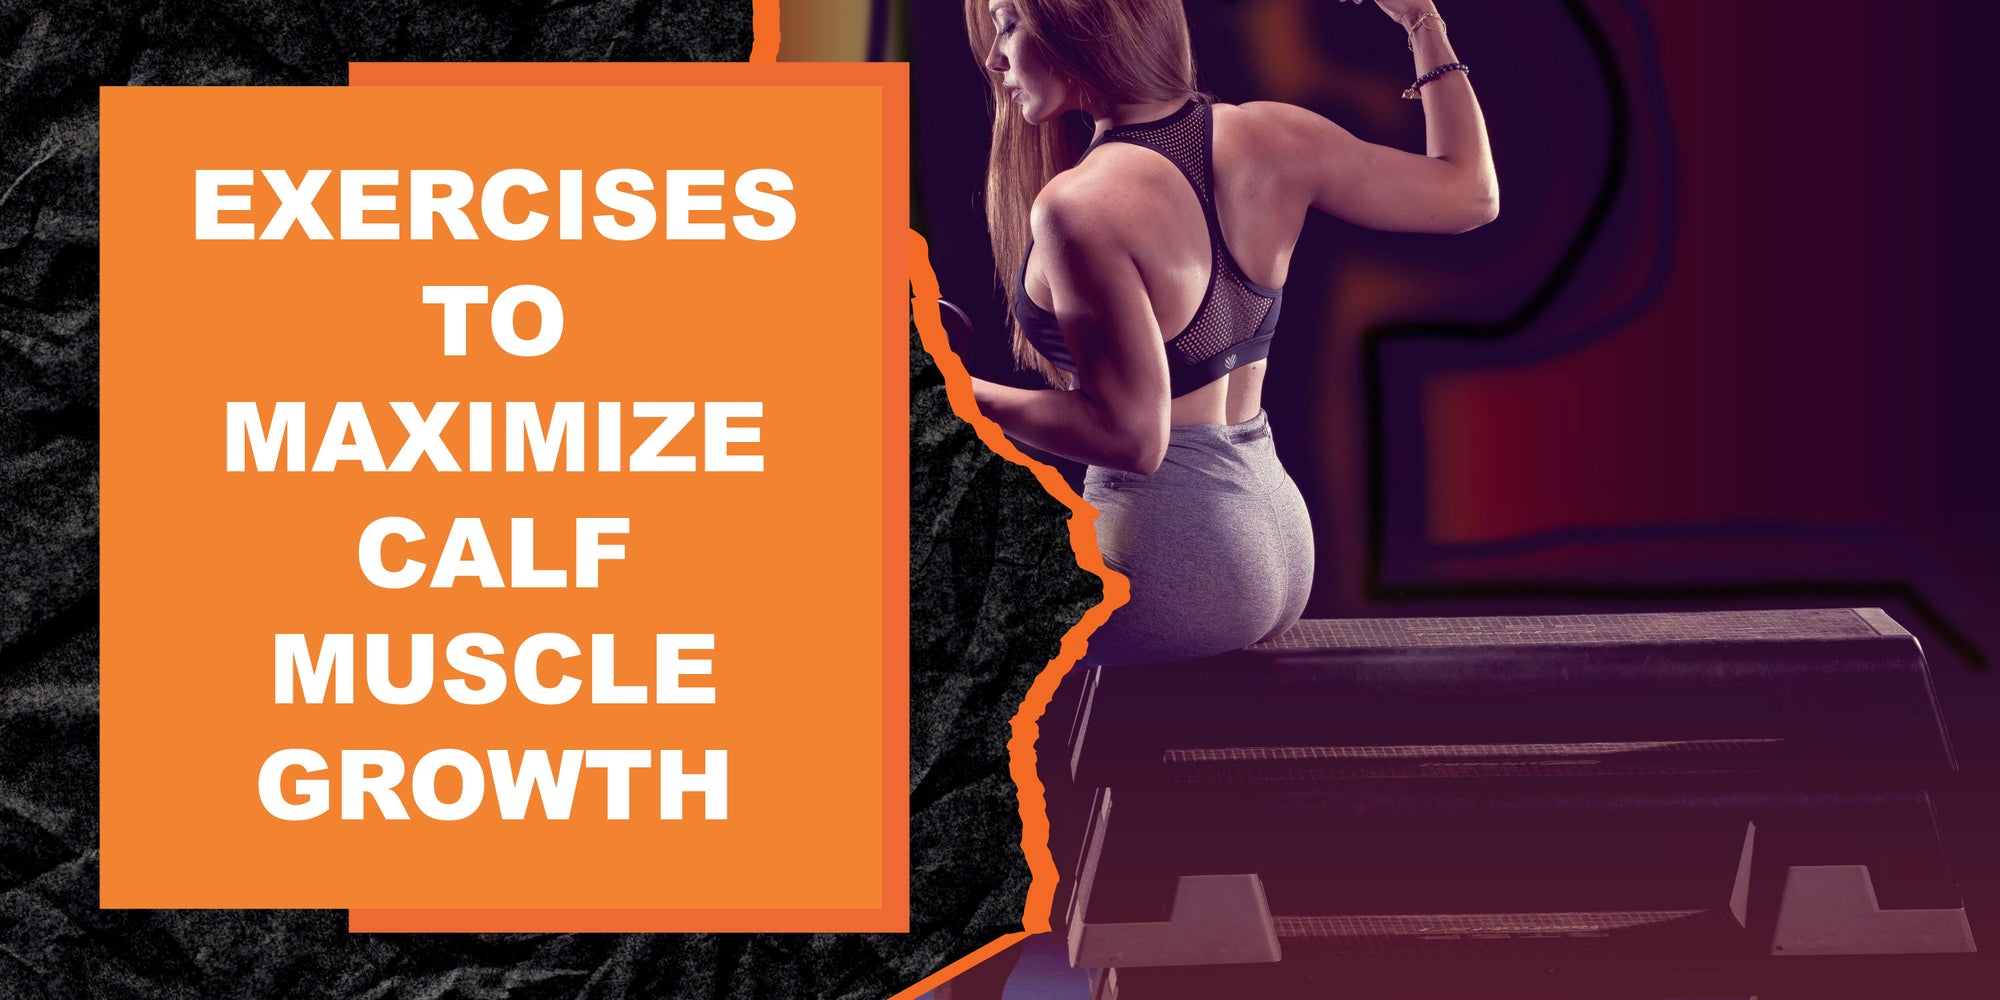 Exercises to Maximize Calf Muscle Growth